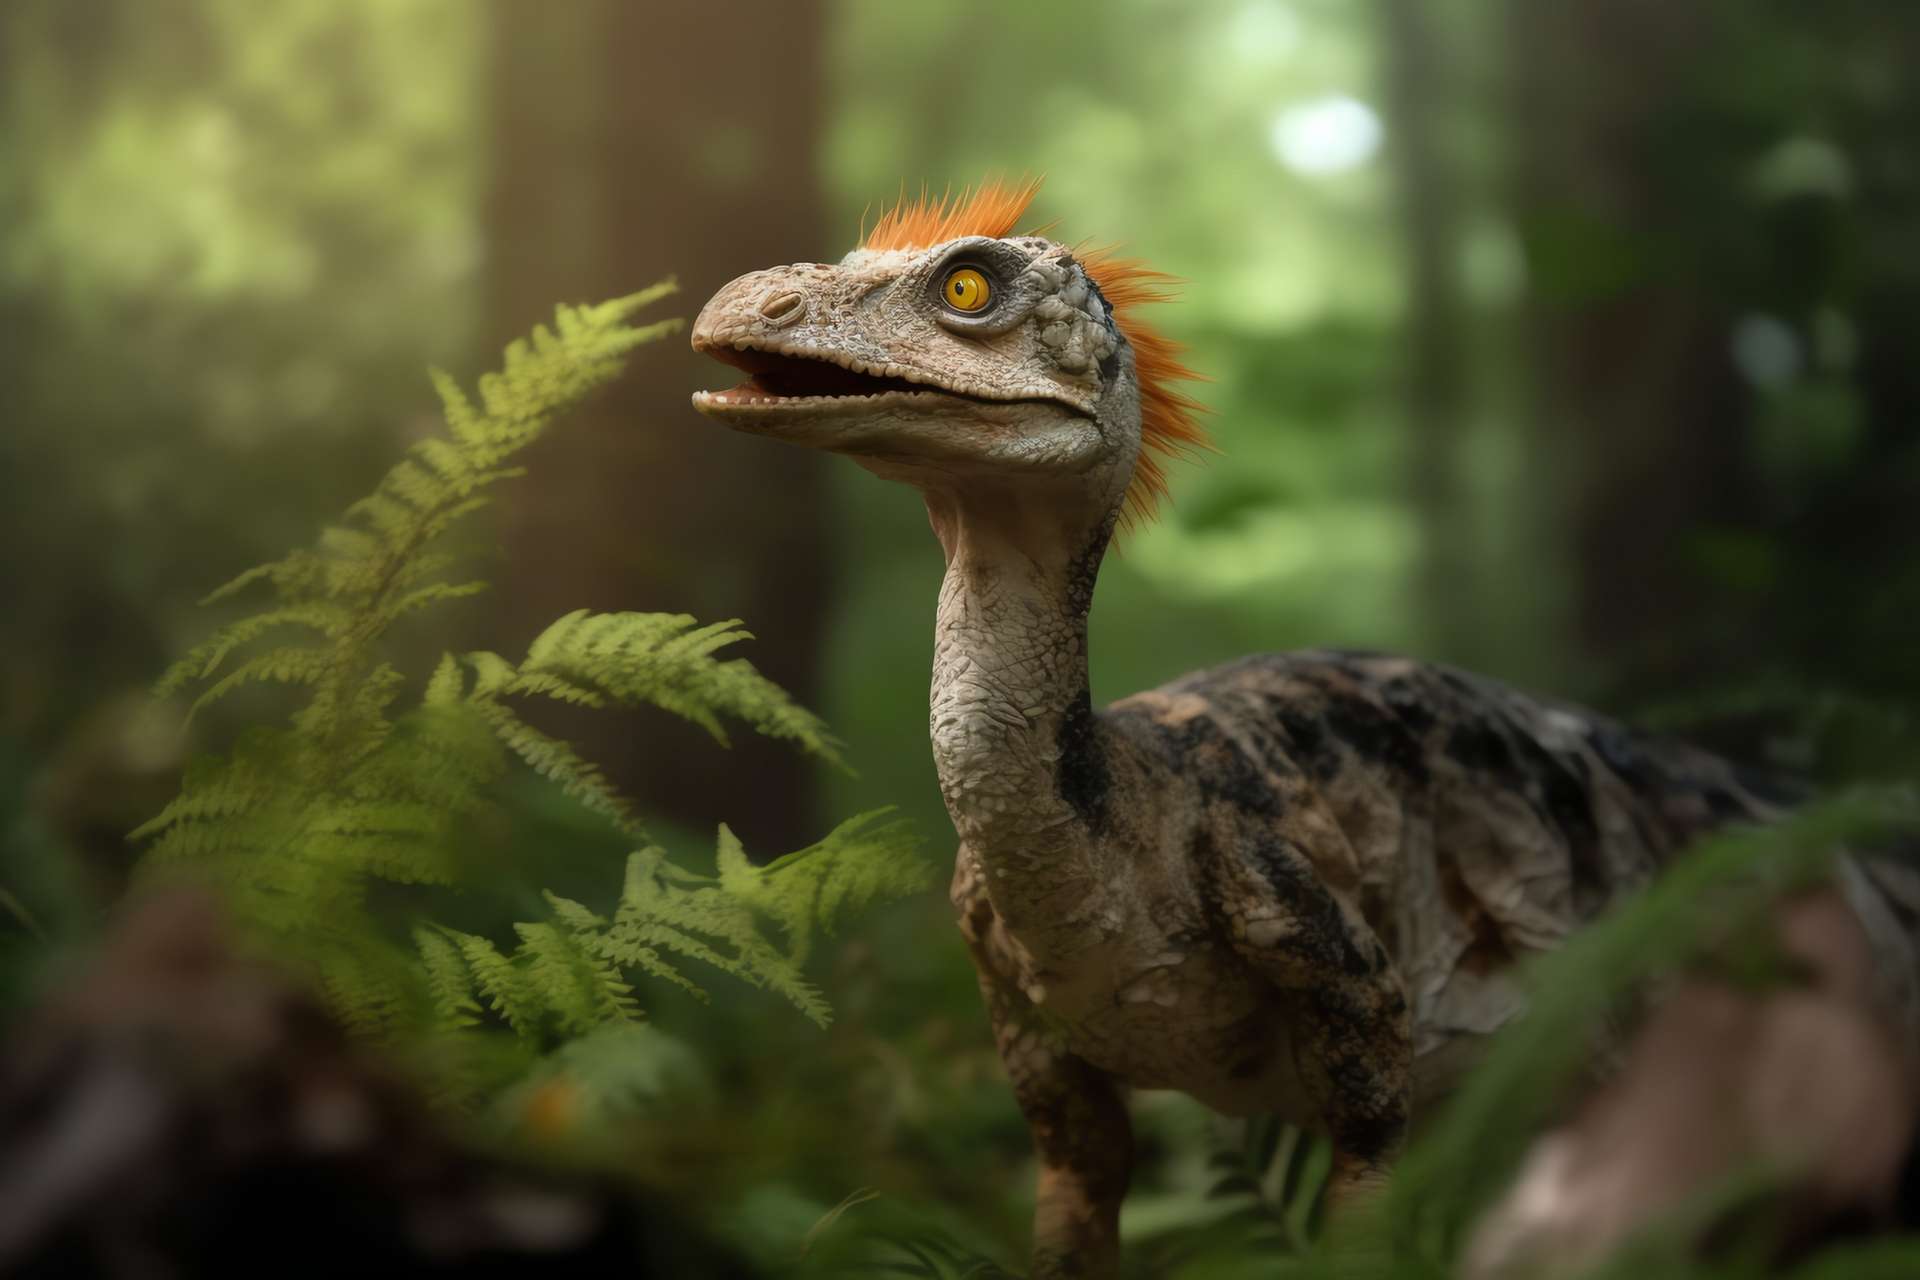 This is what the first feathered dinosaurs must have looked like!